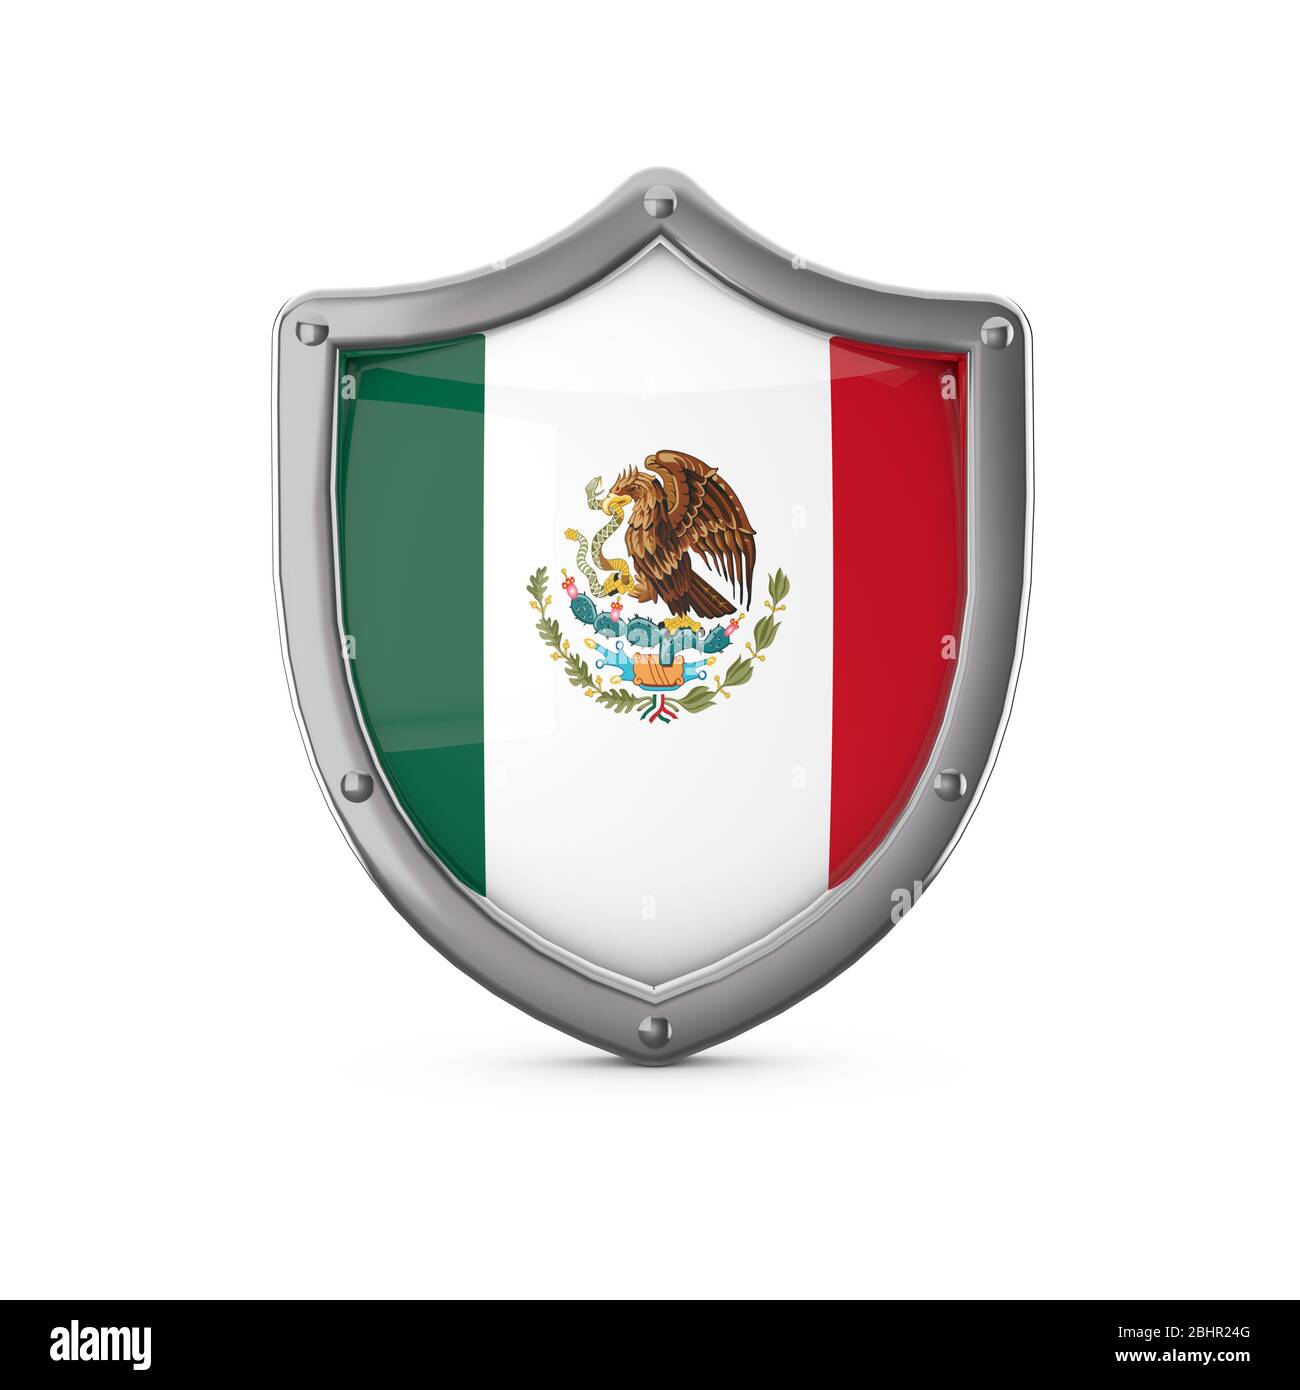 Mexico security concept. Metal shield shape with national flag Stock Photo